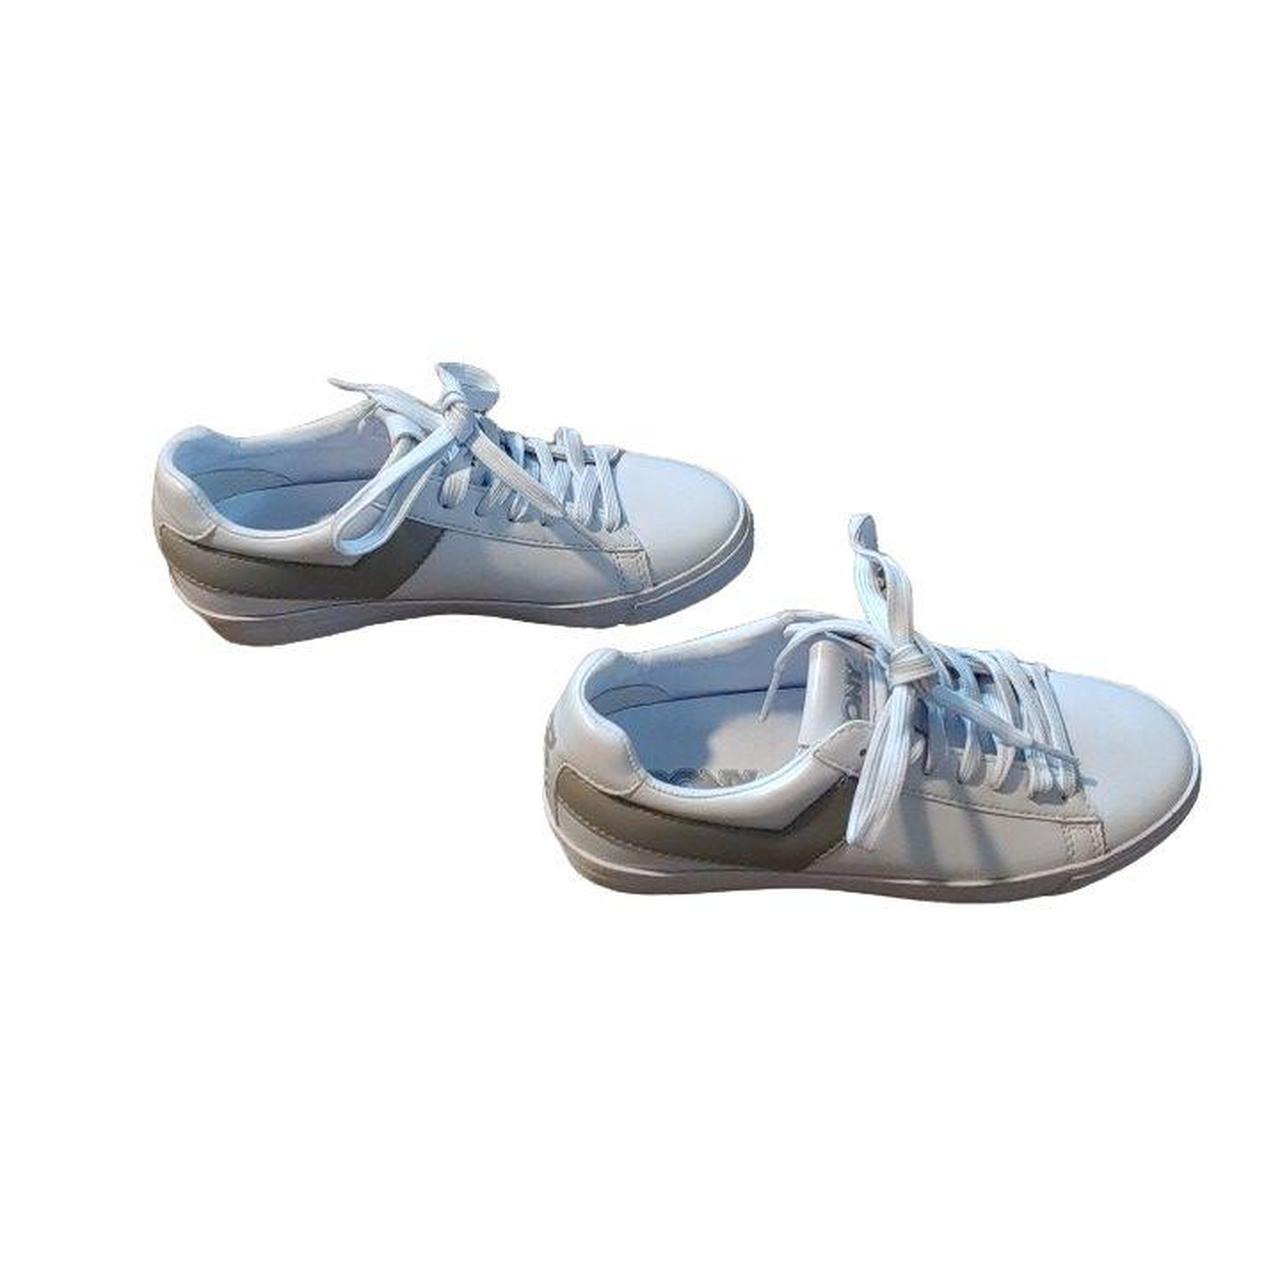 Product Image 4 - PONY sneakers size 6
Smoke free